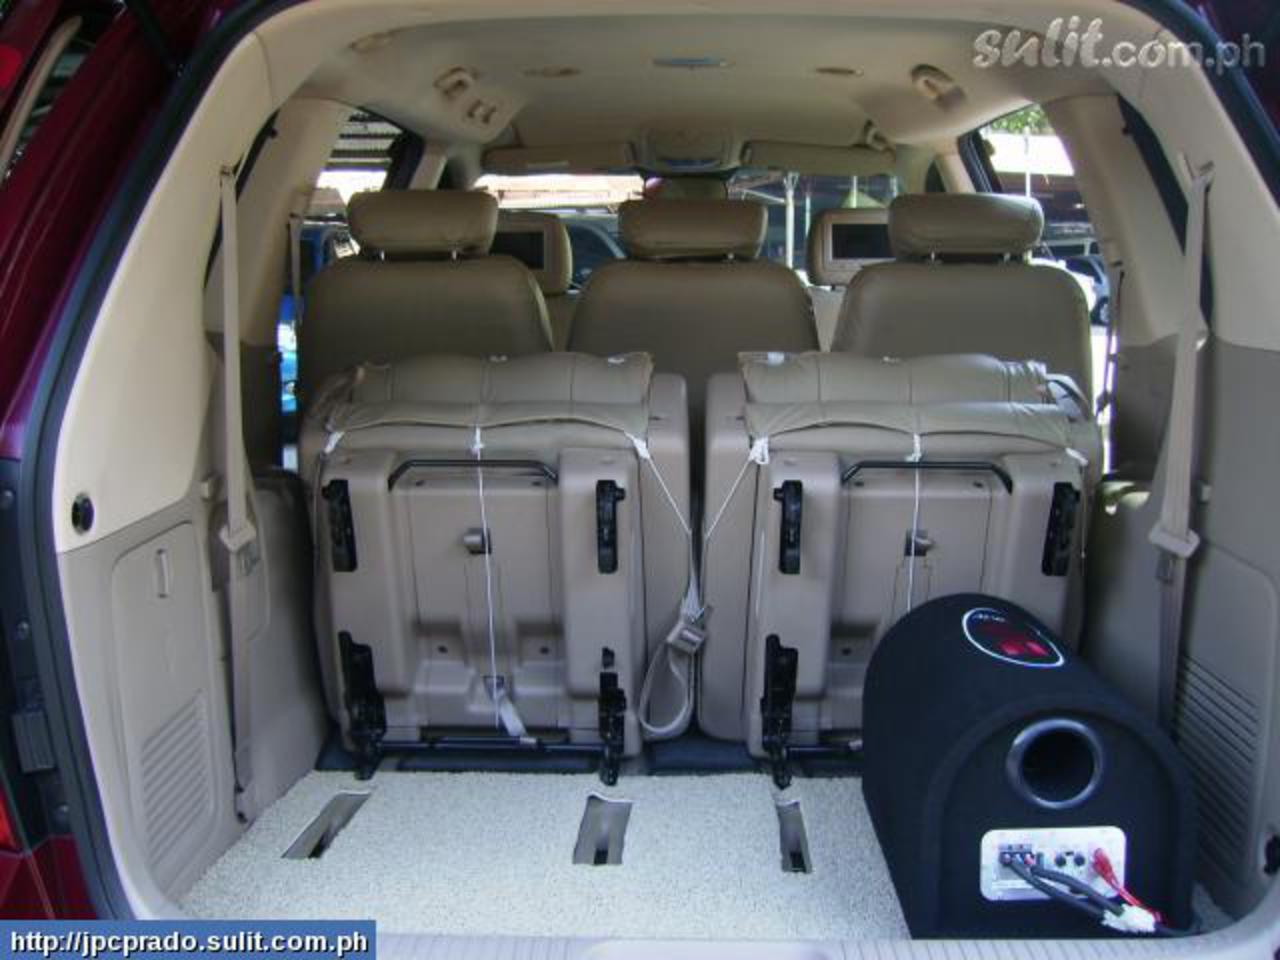 Kia Carnival LX 29 CRDi: Photo gallery, complete information about ...